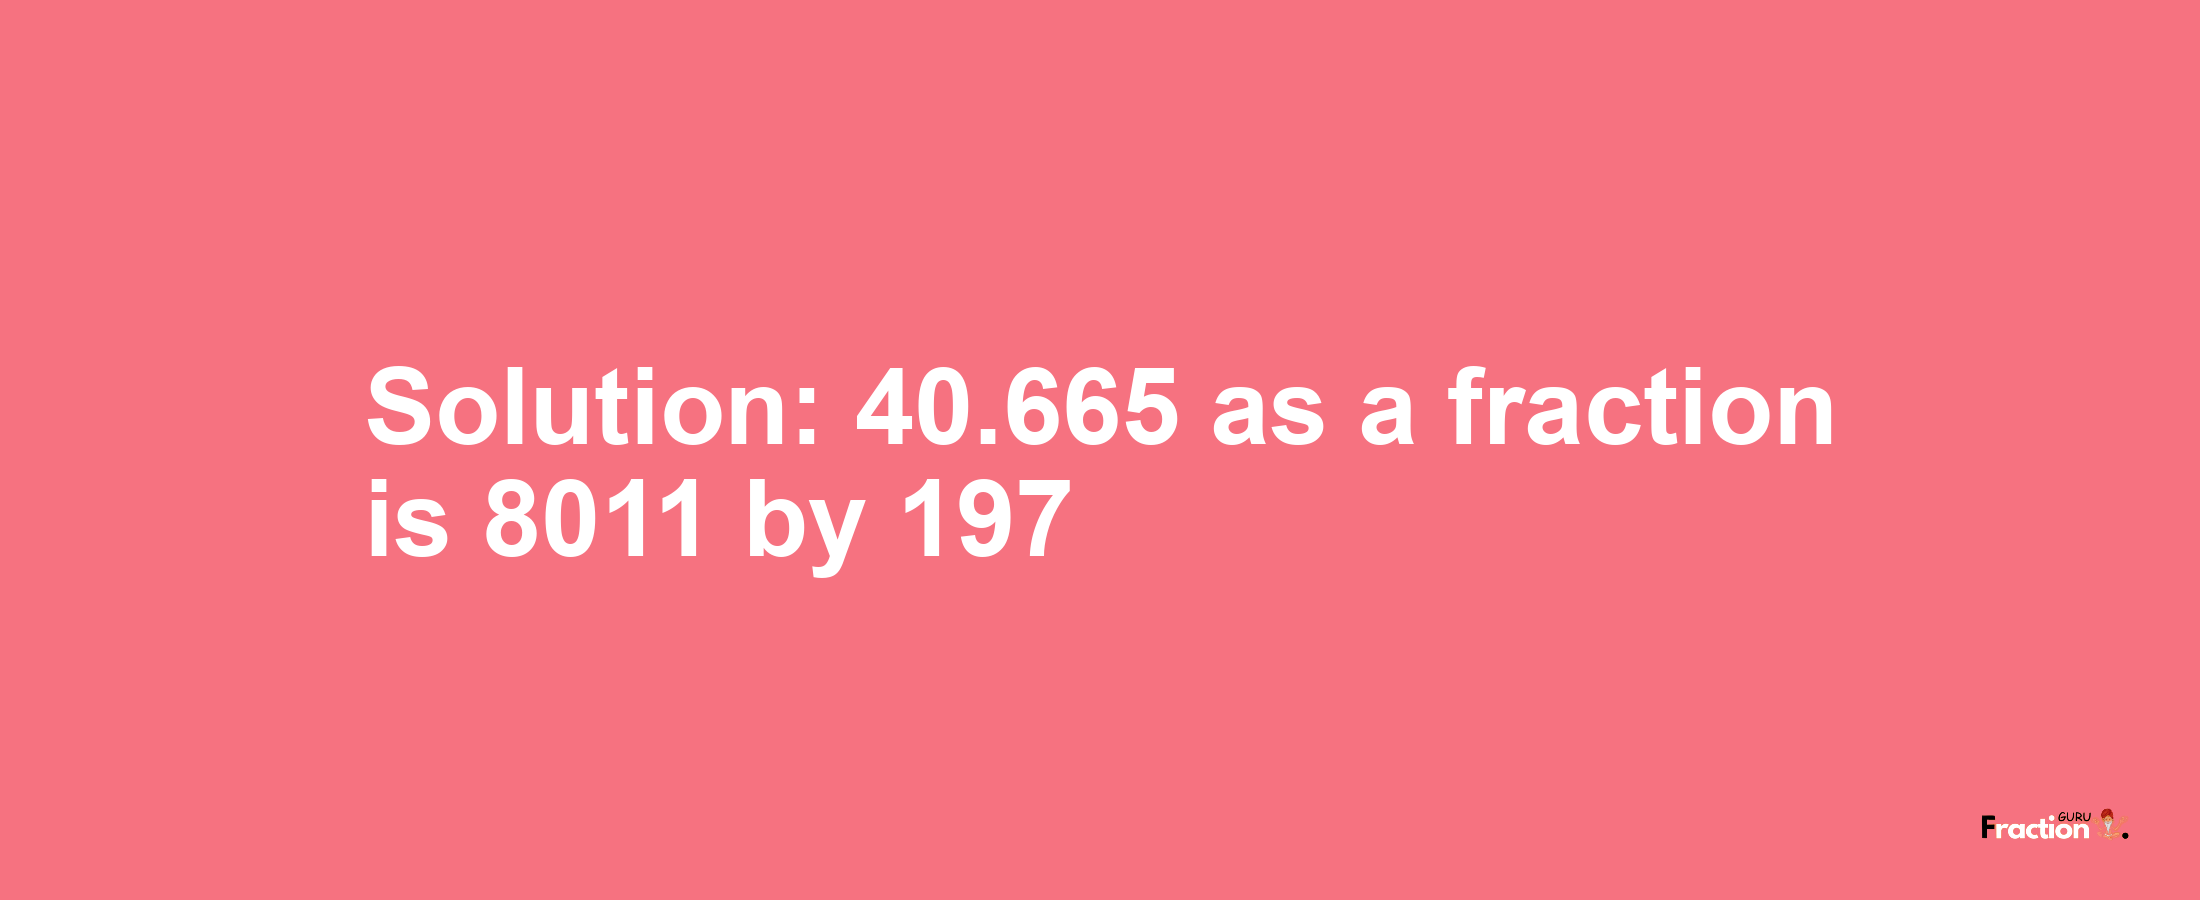 Solution:40.665 as a fraction is 8011/197